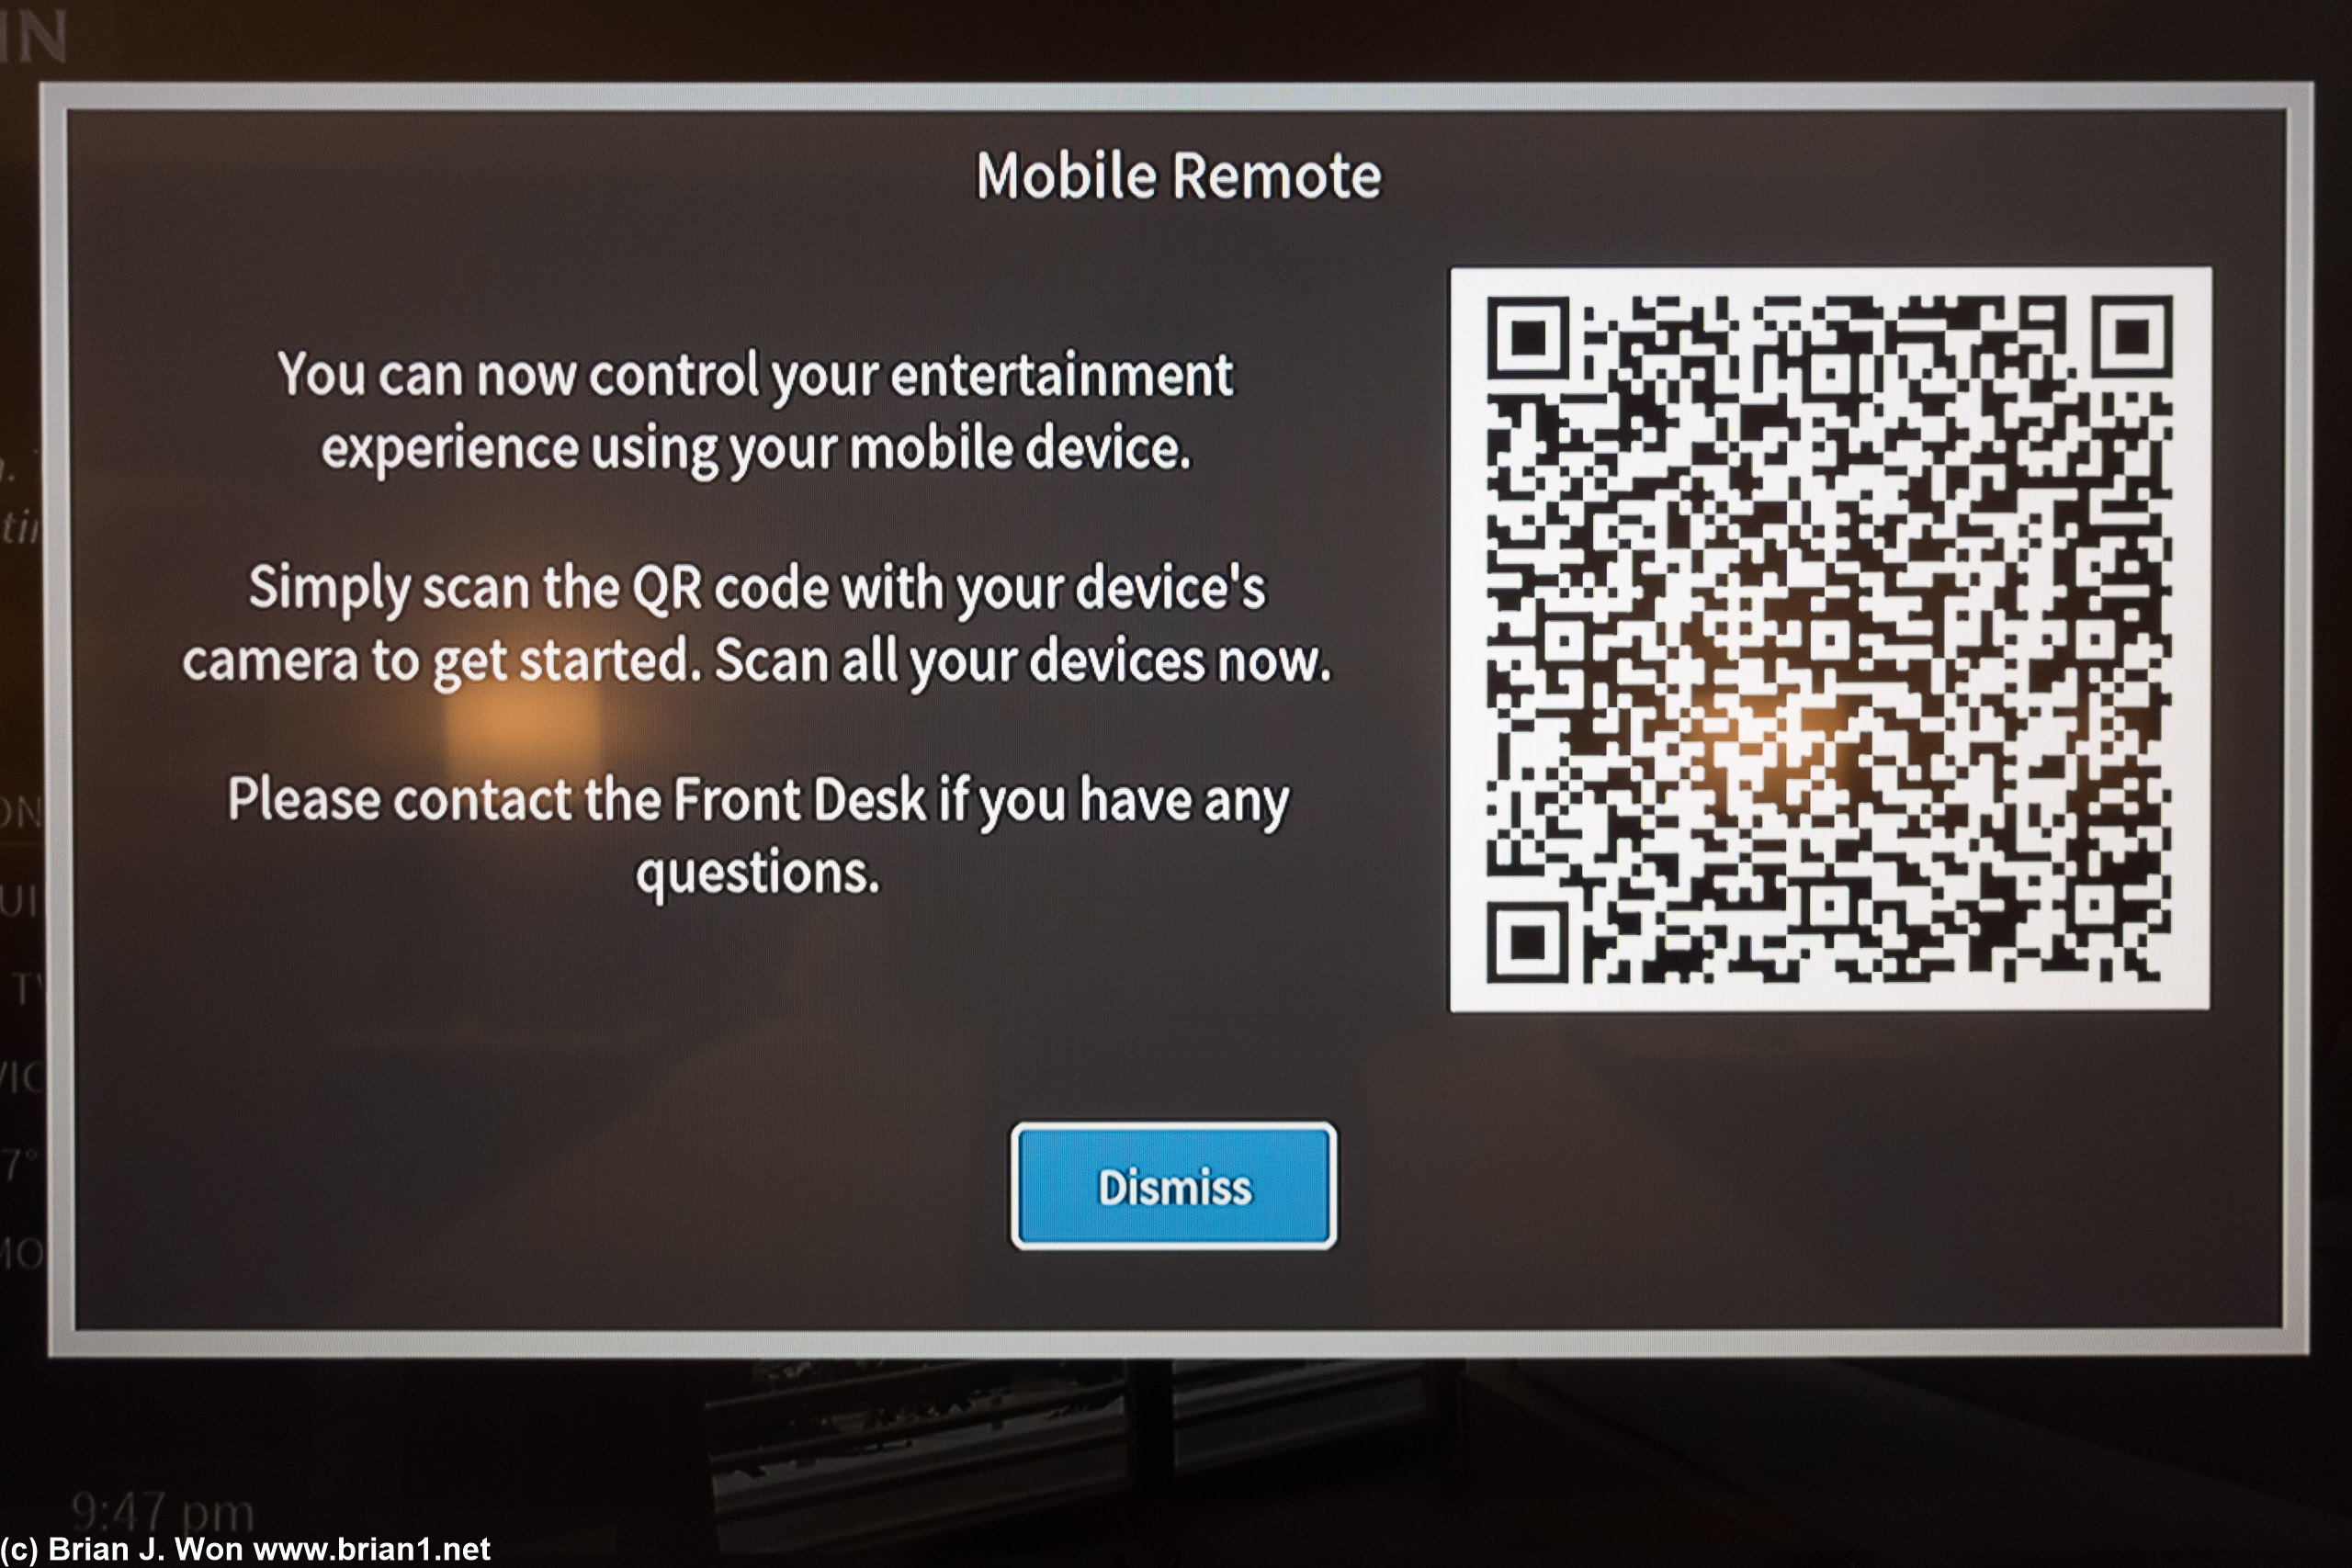 App control of TV. Assuming this is because of COVID-19, but still cool.